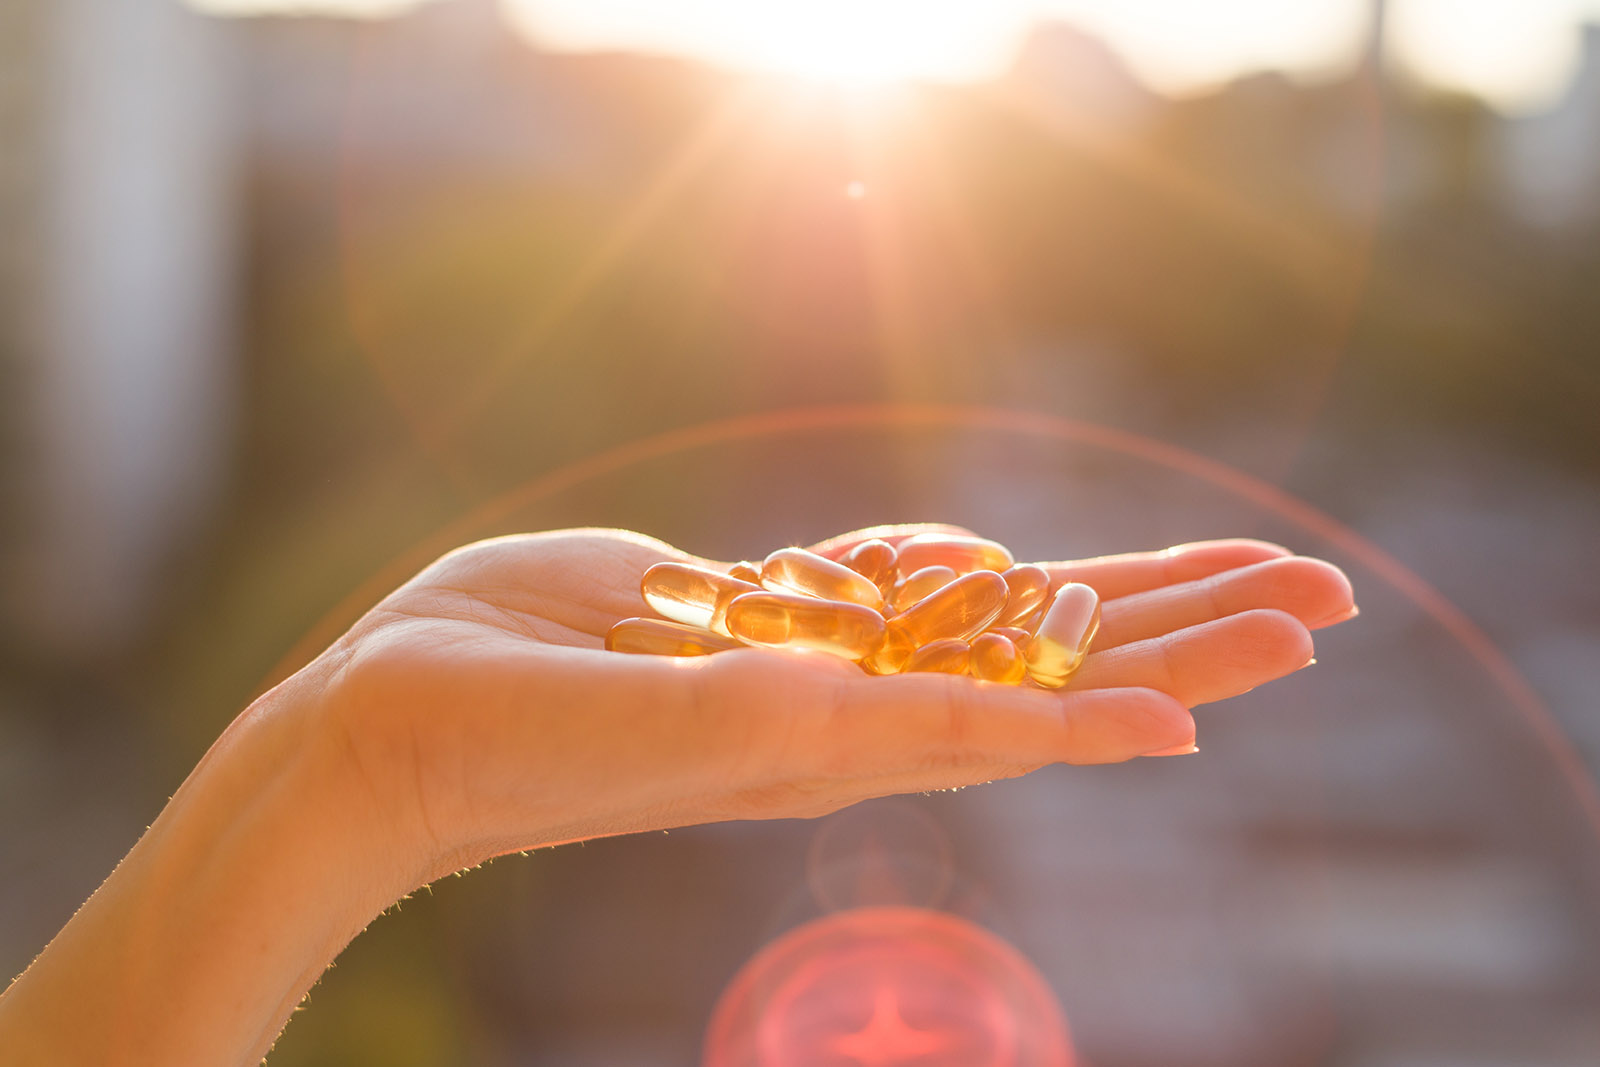 omega3 supplement pills in the sun